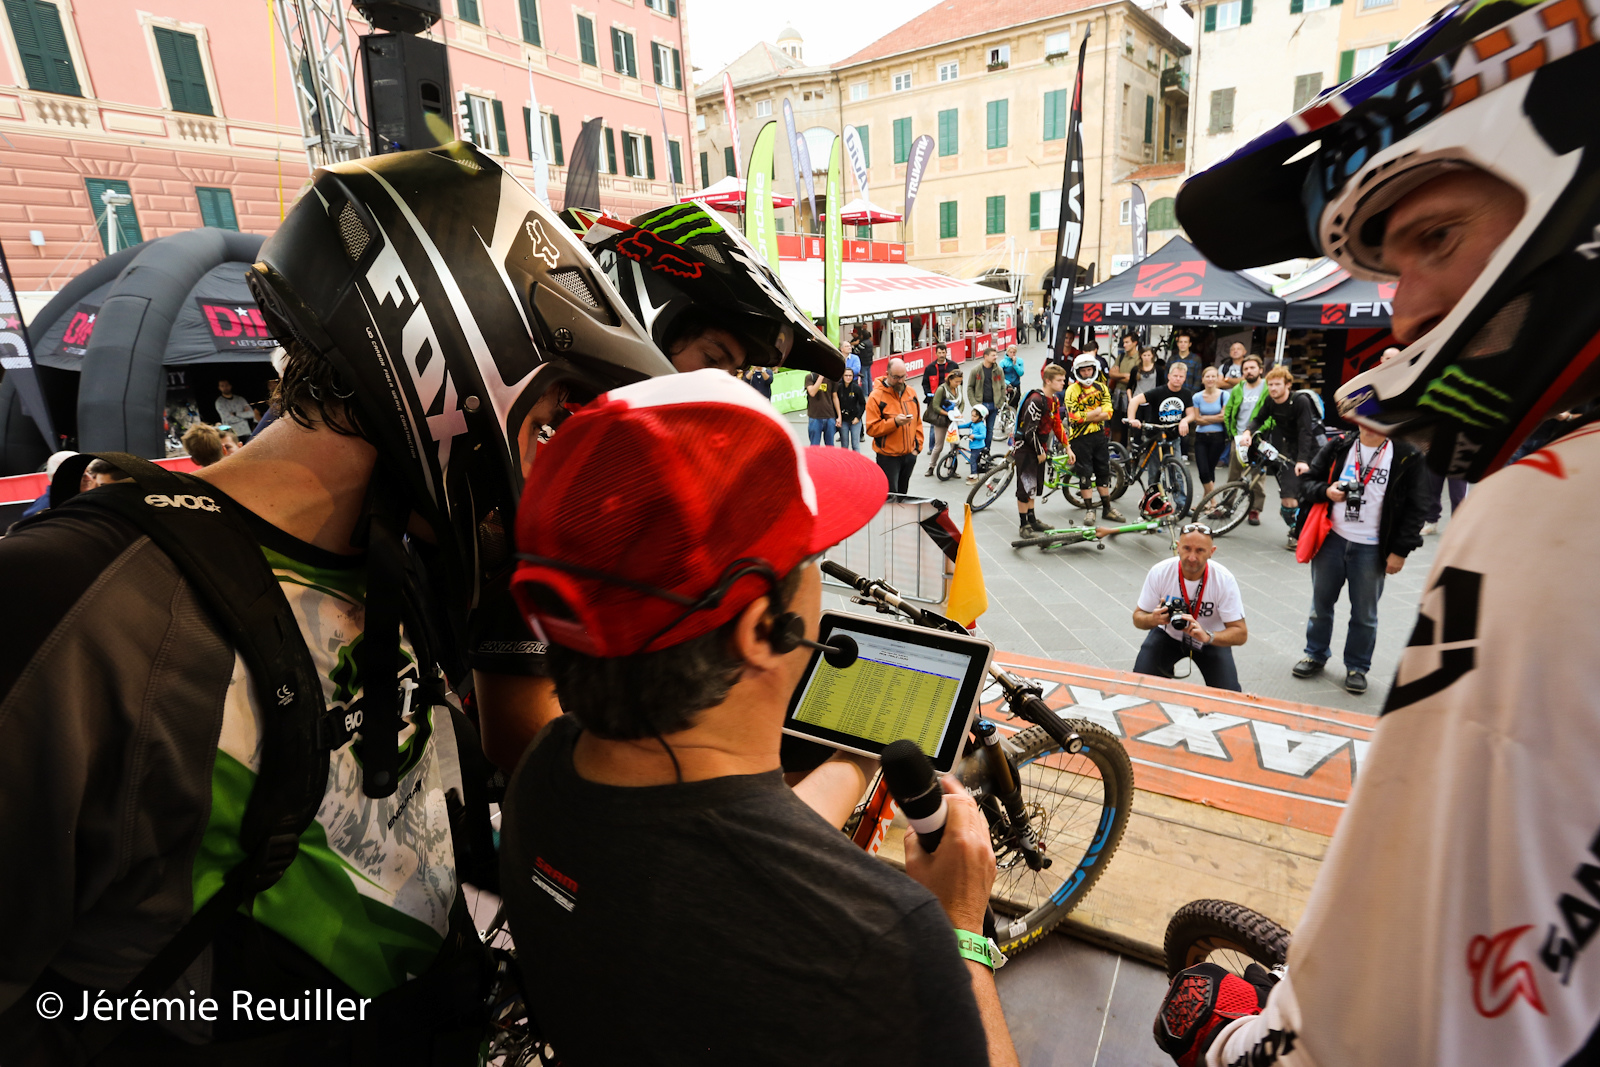 Steve Peat cross the finish line and go on the stage. He look with Enrico the ranking.